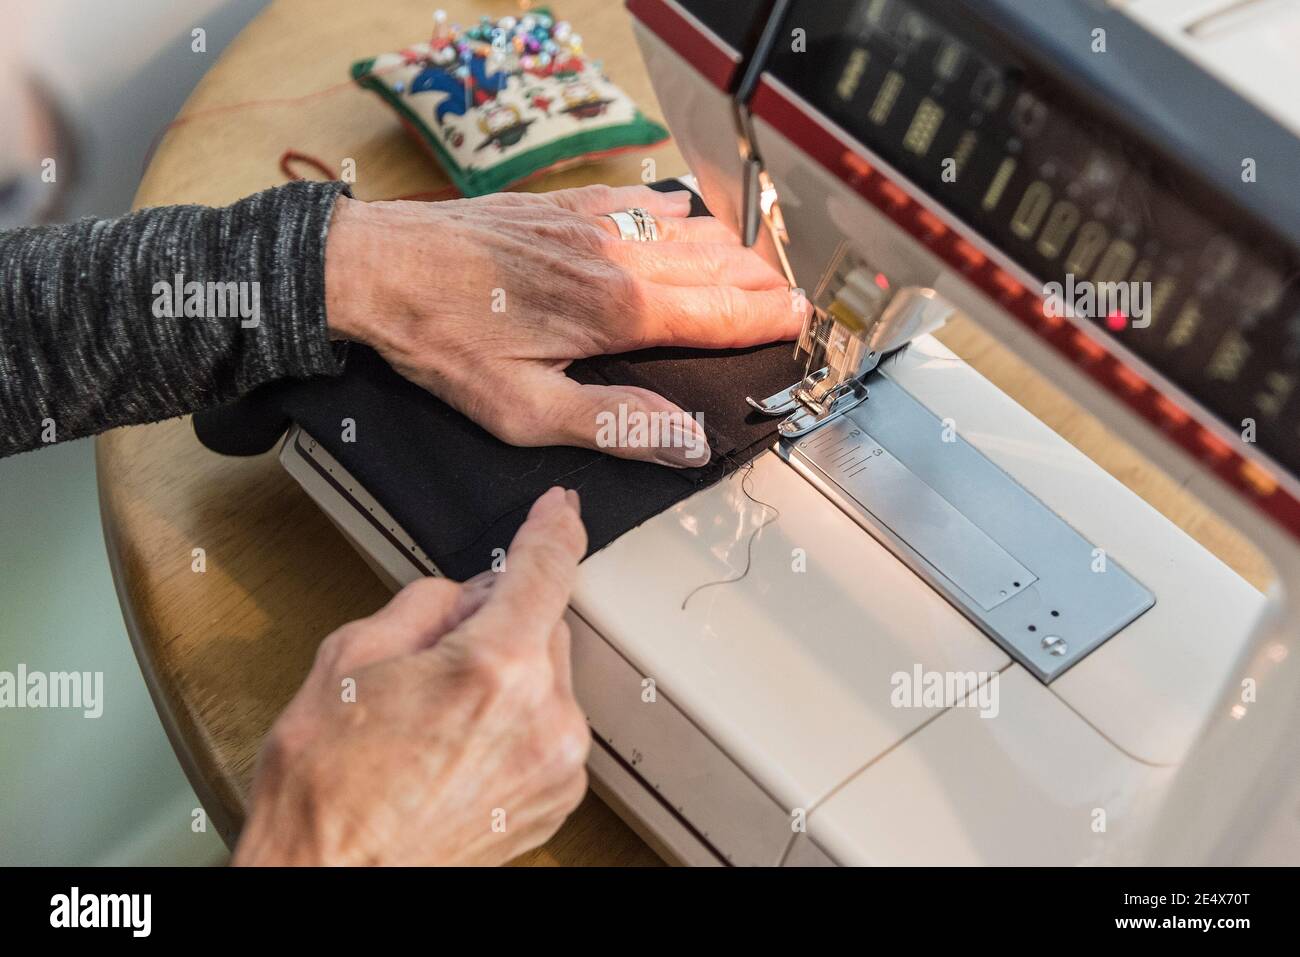 A woman using a sewing machine to sew material. Stock Photo